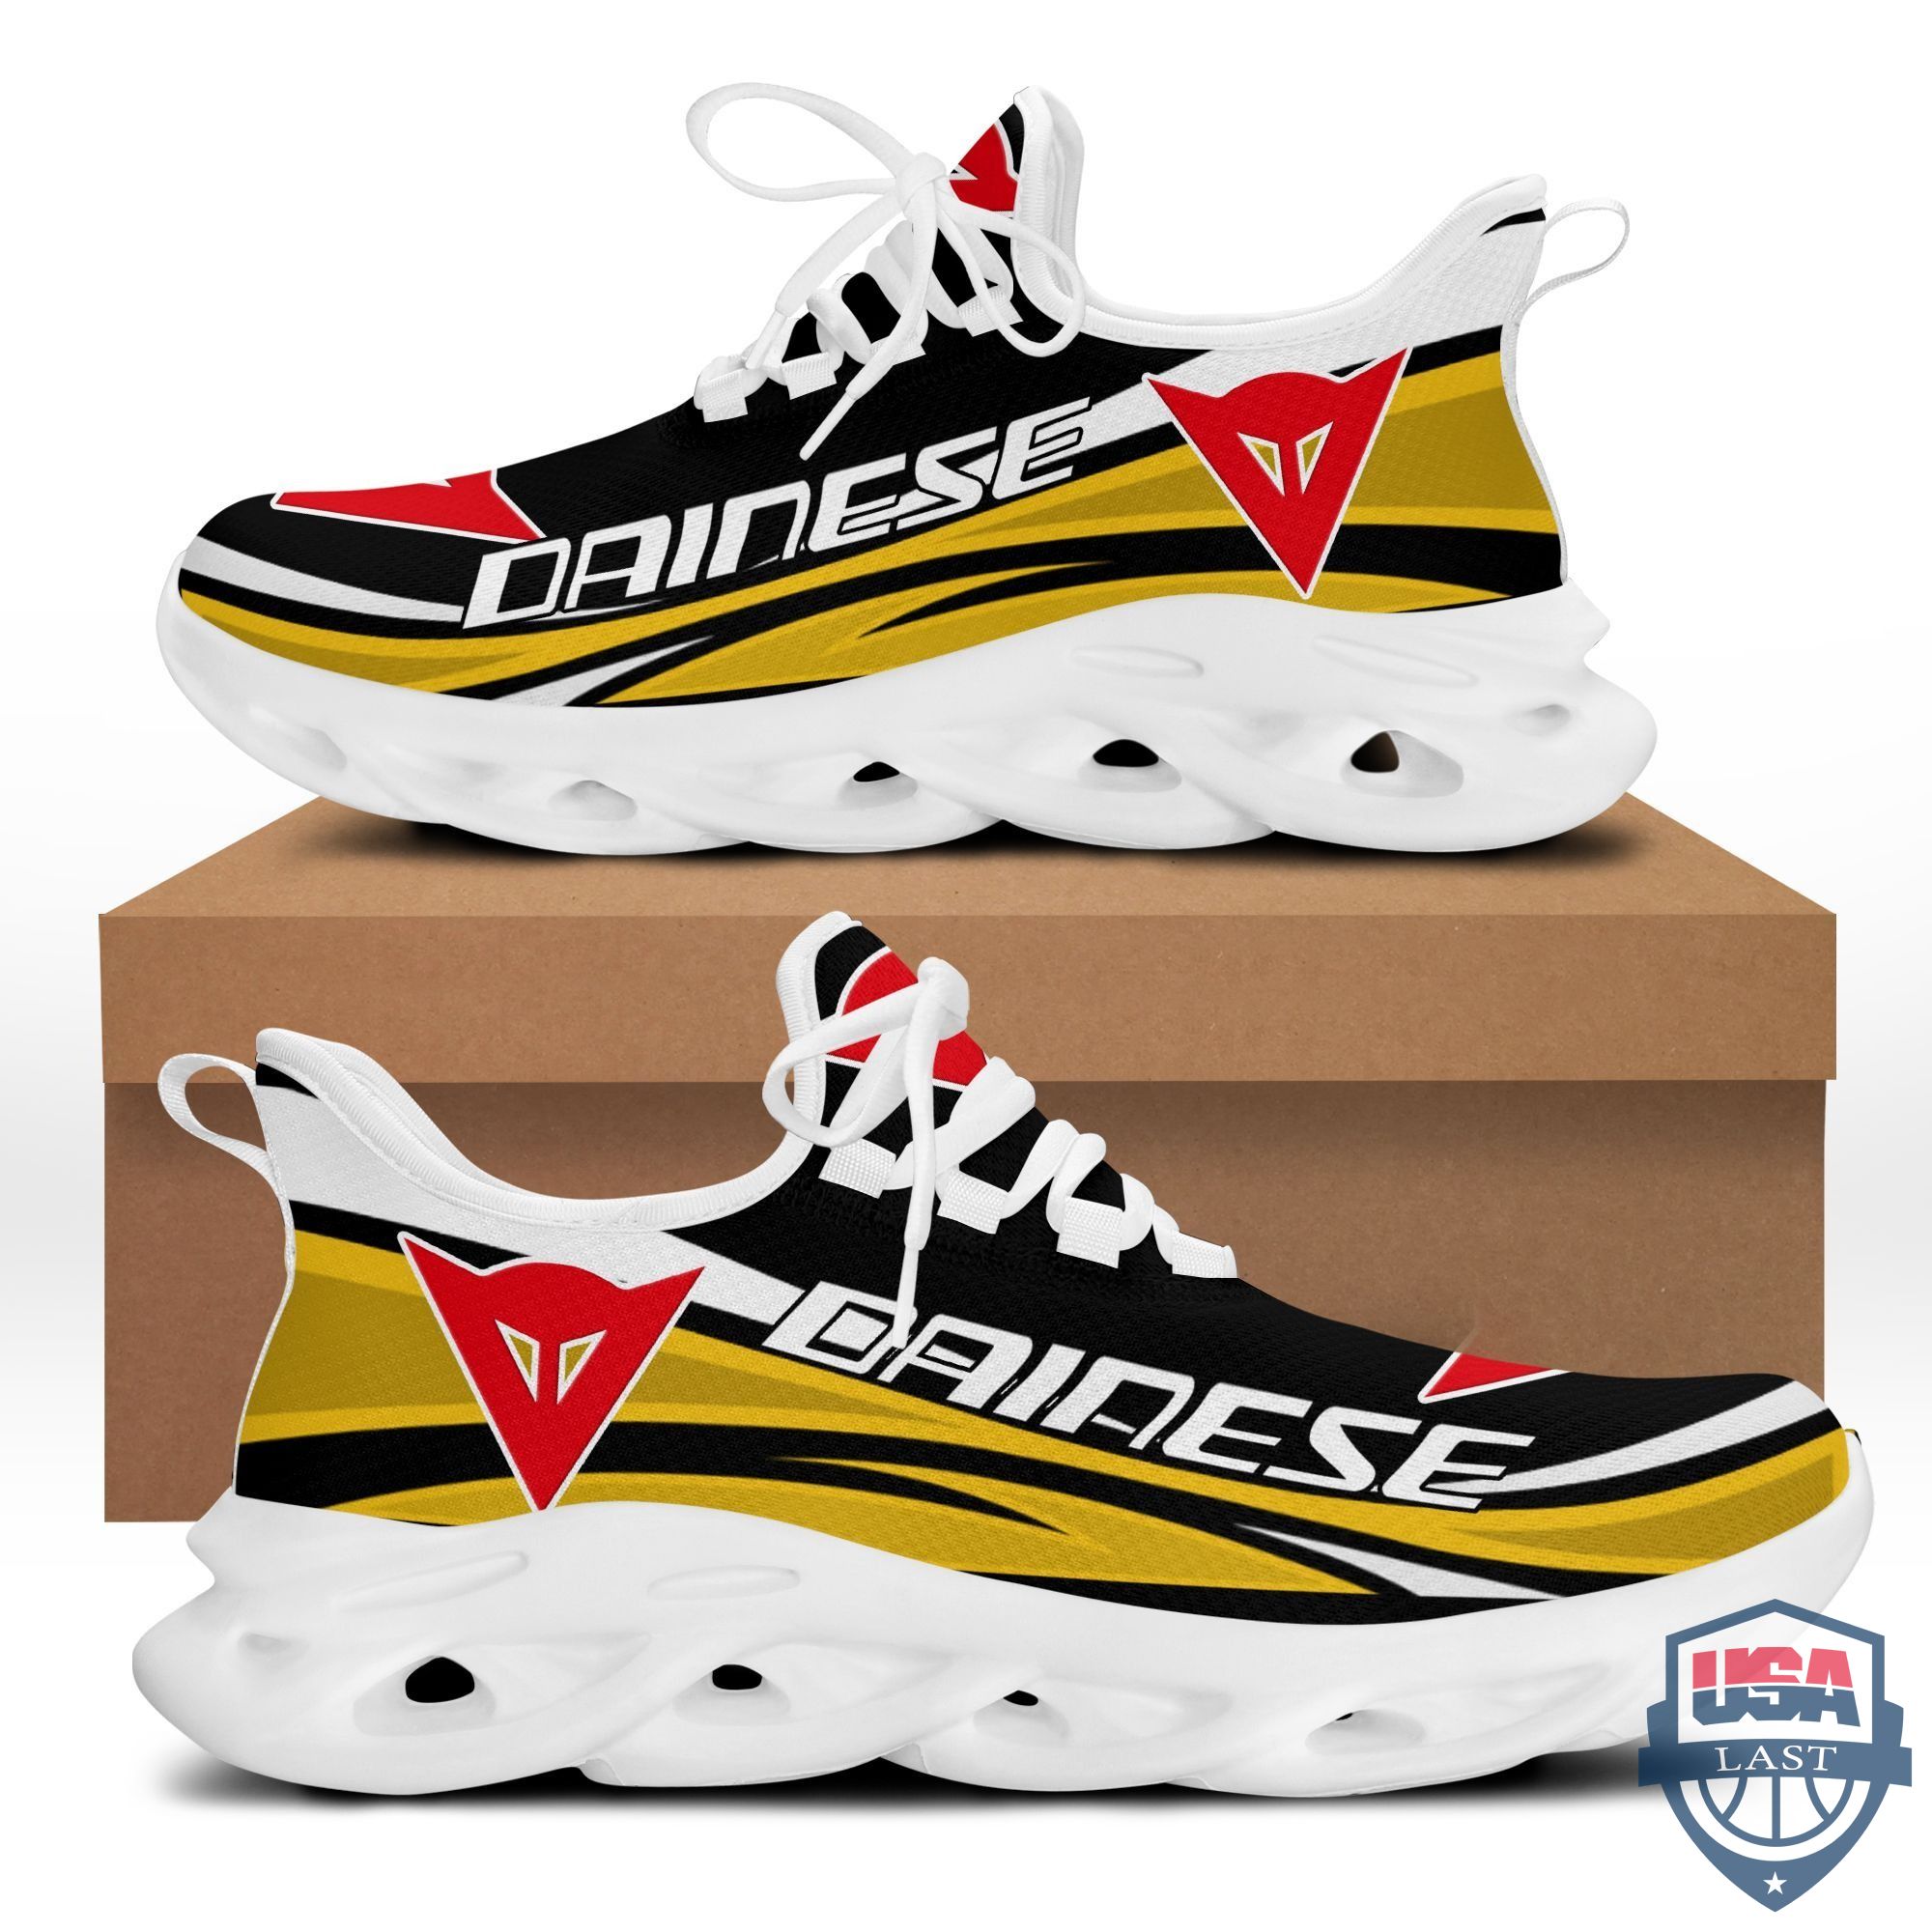 Dainese Sport Sneaker Running Shoes Yellow Version